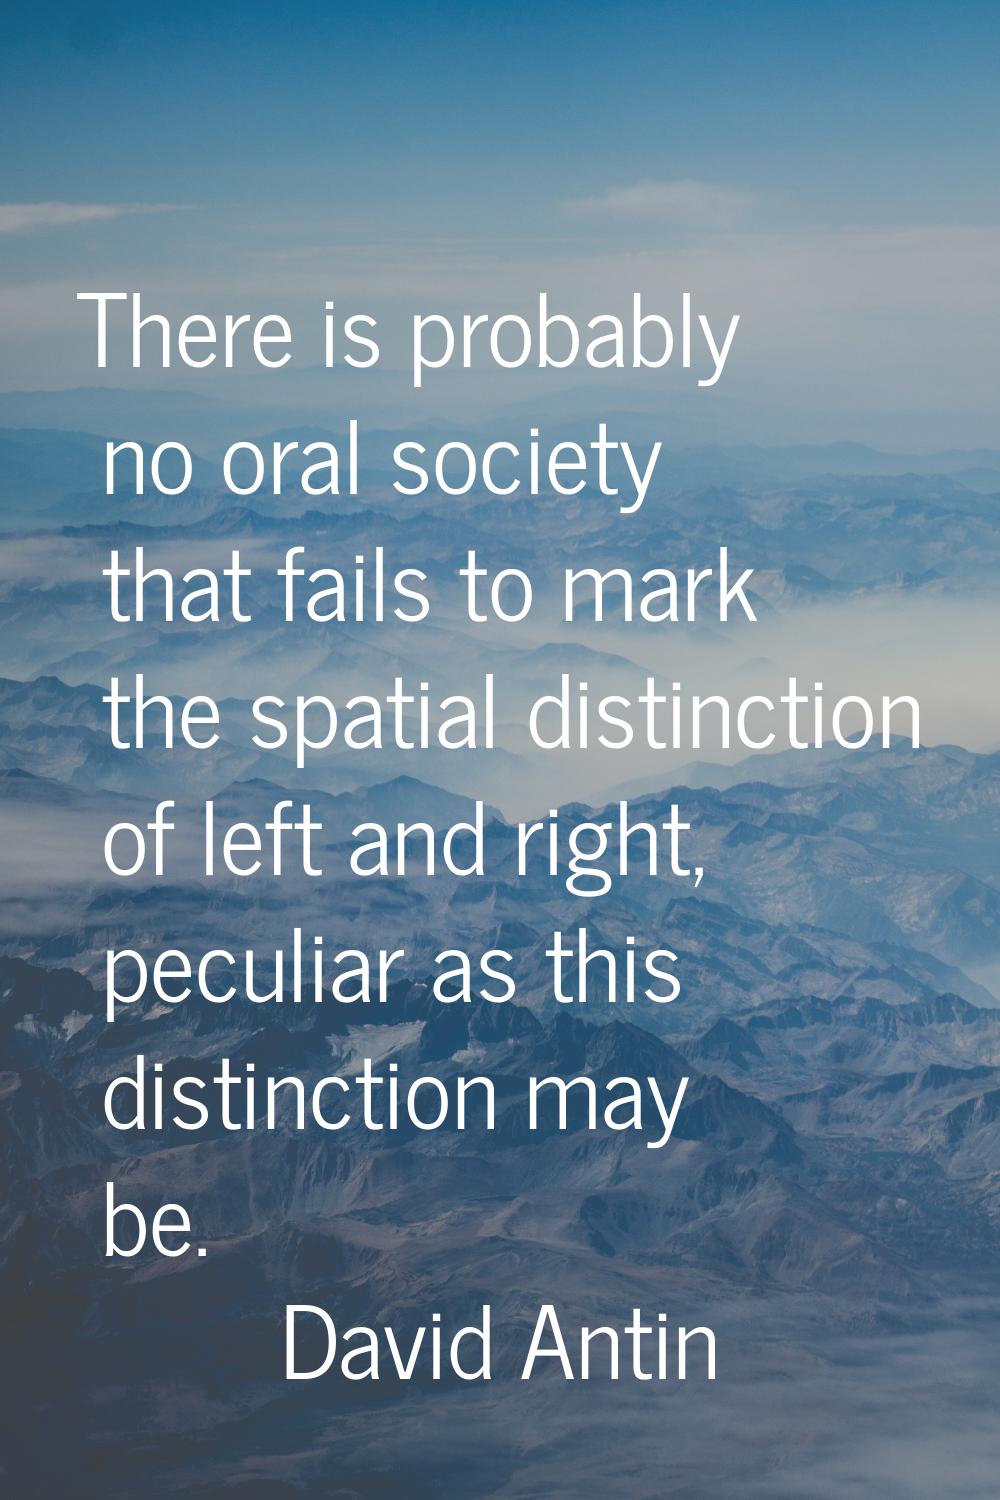 There is probably no oral society that fails to mark the spatial distinction of left and right, pec